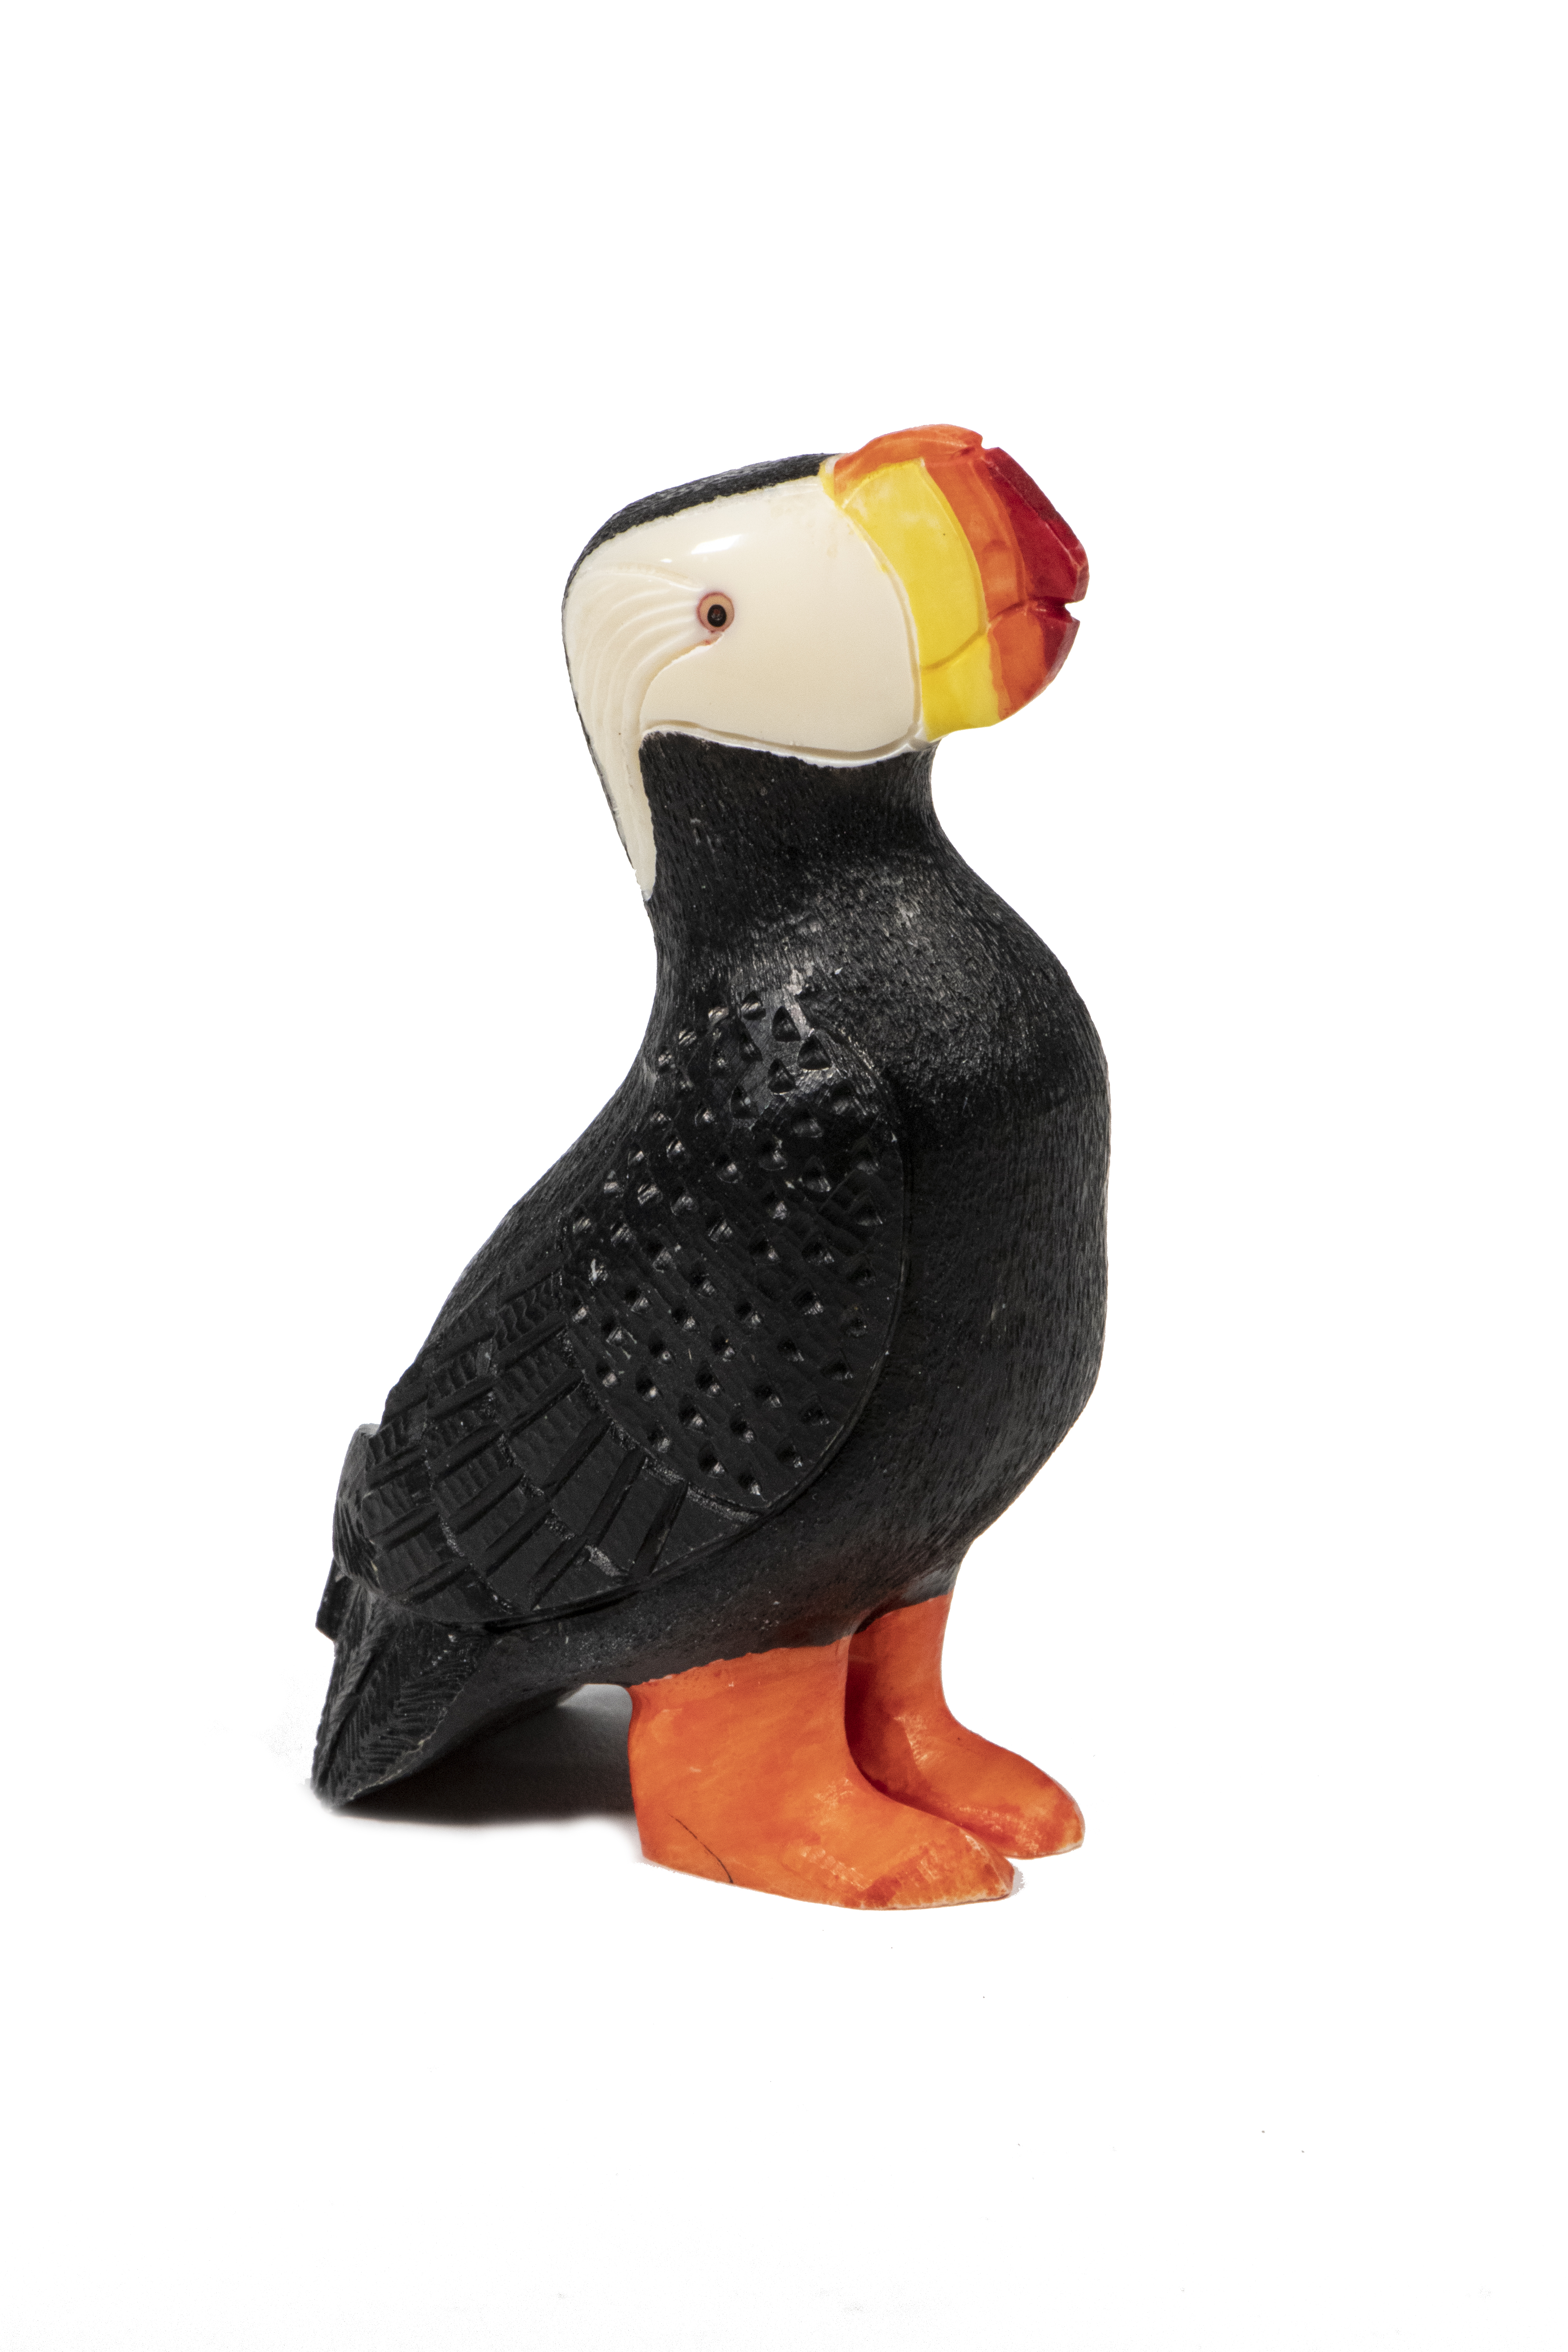 INUIT SCULPTURE OF A PUFFIN BY 2b1d71